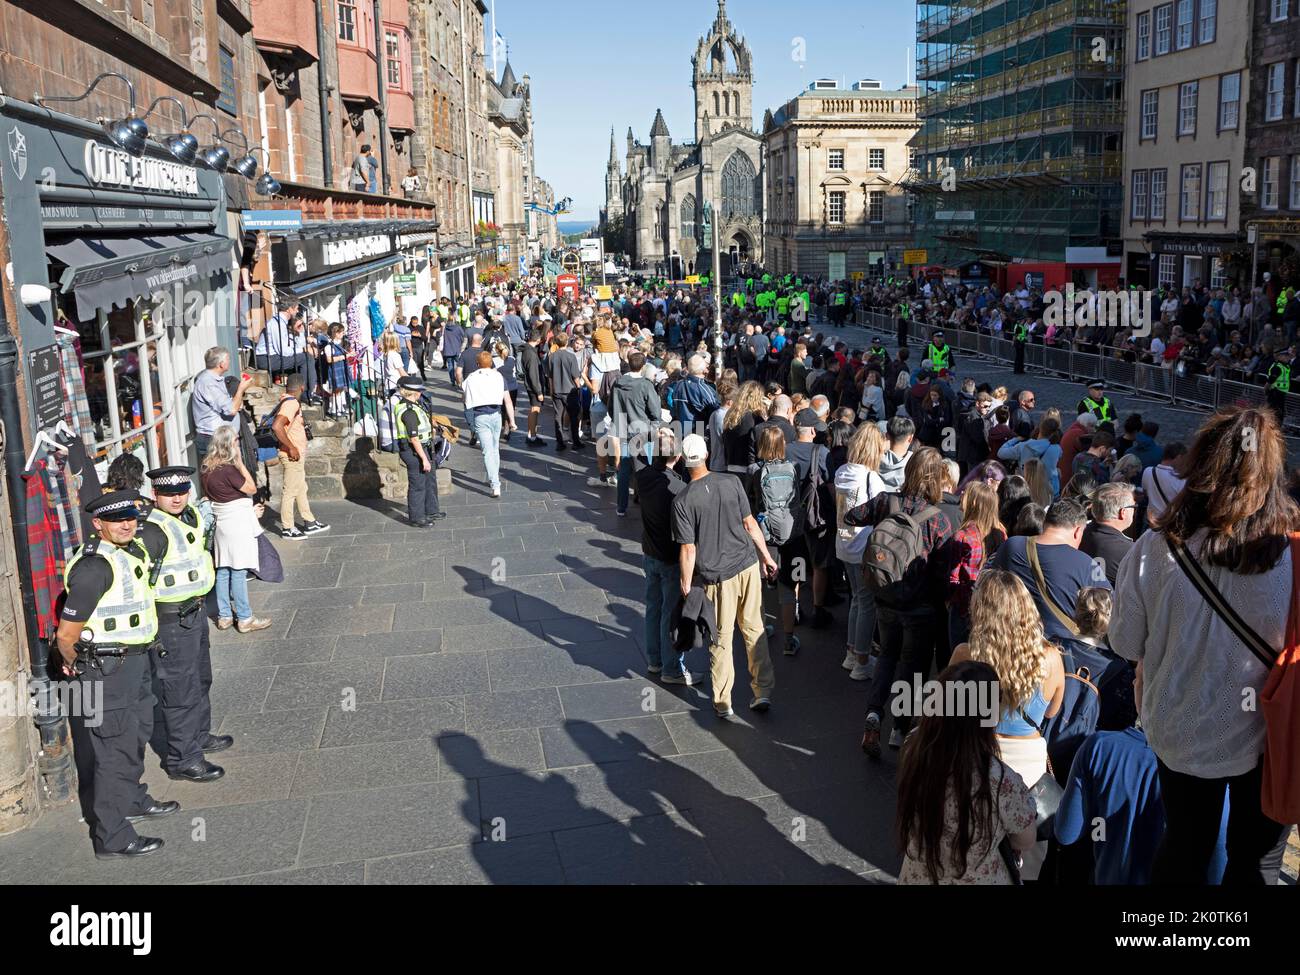 Royal Mile, Edinburgh, Scotland, UK. Crowds gather for Coffin of Her Majesty Queen Elizabeth II departing St Giles Cathedral.13th September 2022. Credit: Arch White/alamy live news. Stock Photo